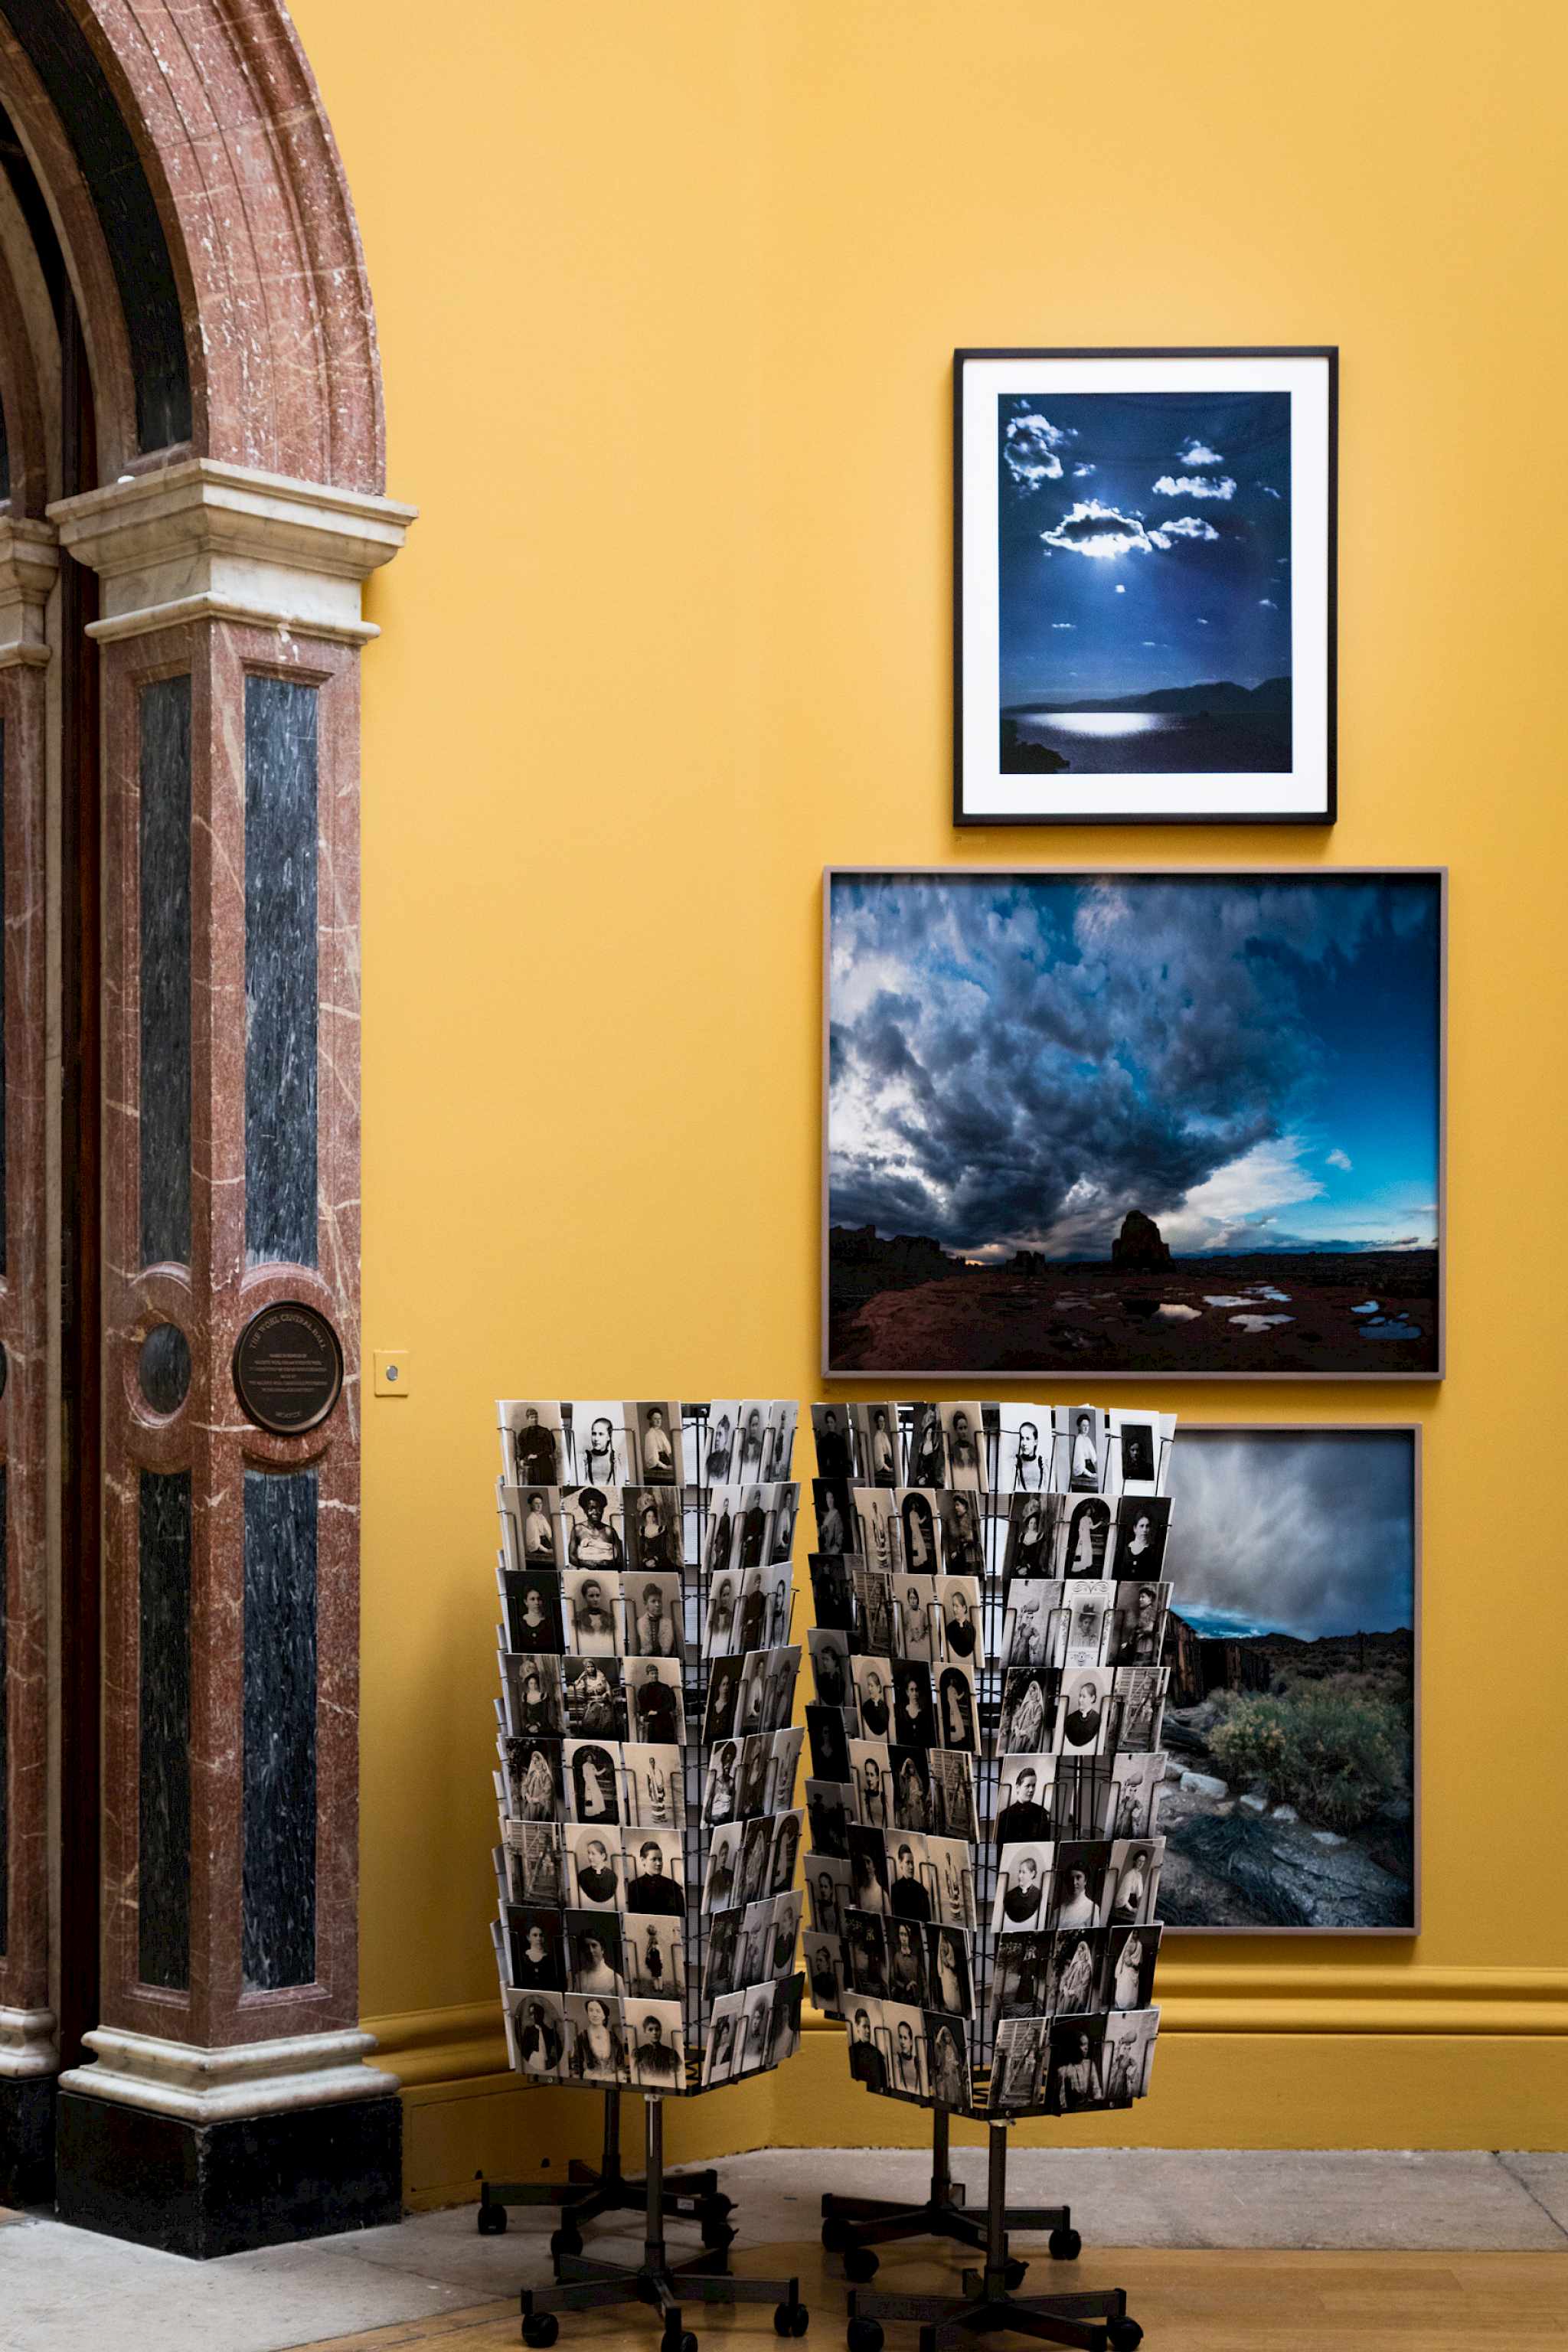 Installation view, photograph by Scott Mead